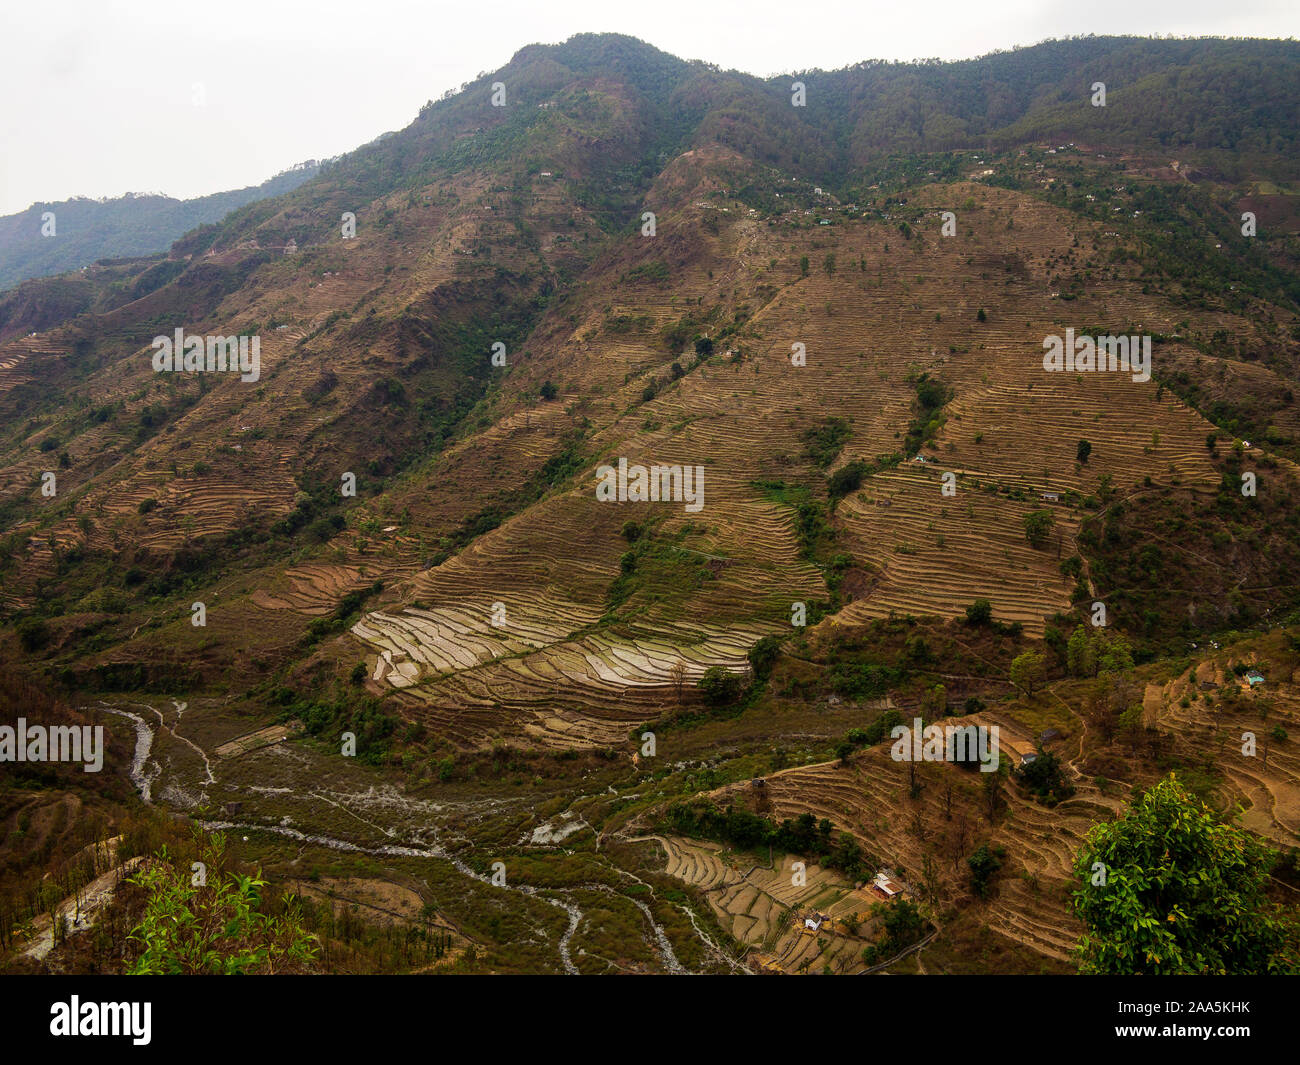 Extensive terraced fields at the remote village of Dalkanya on the Nandhour Valley, Kumaon Hills, Uttarakhand, India Stock Photo